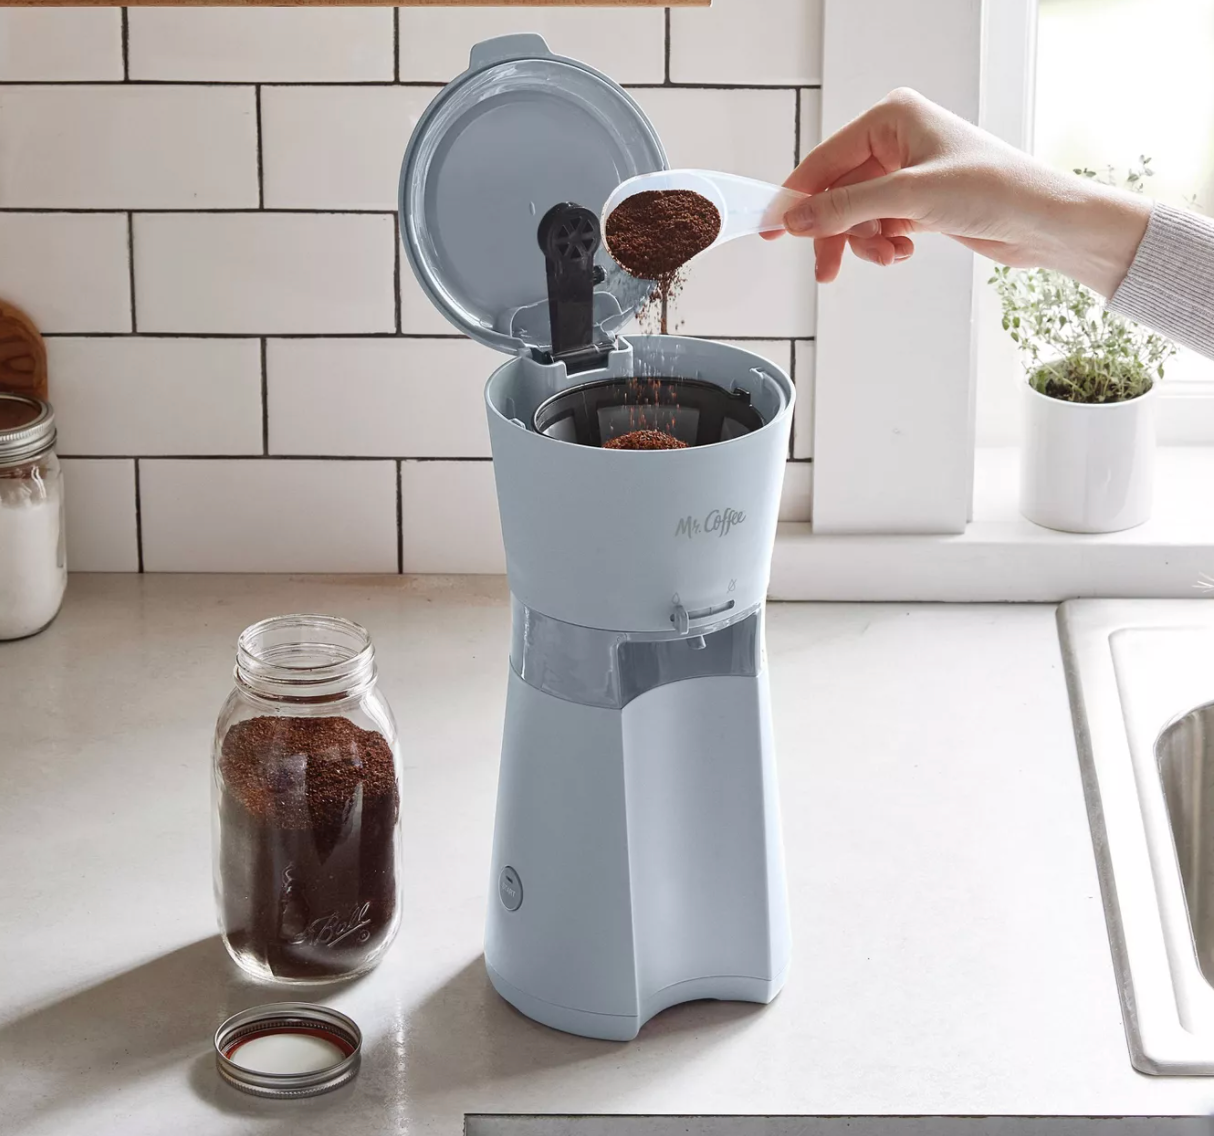 Mr. Coffee now sells an iced coffee maker